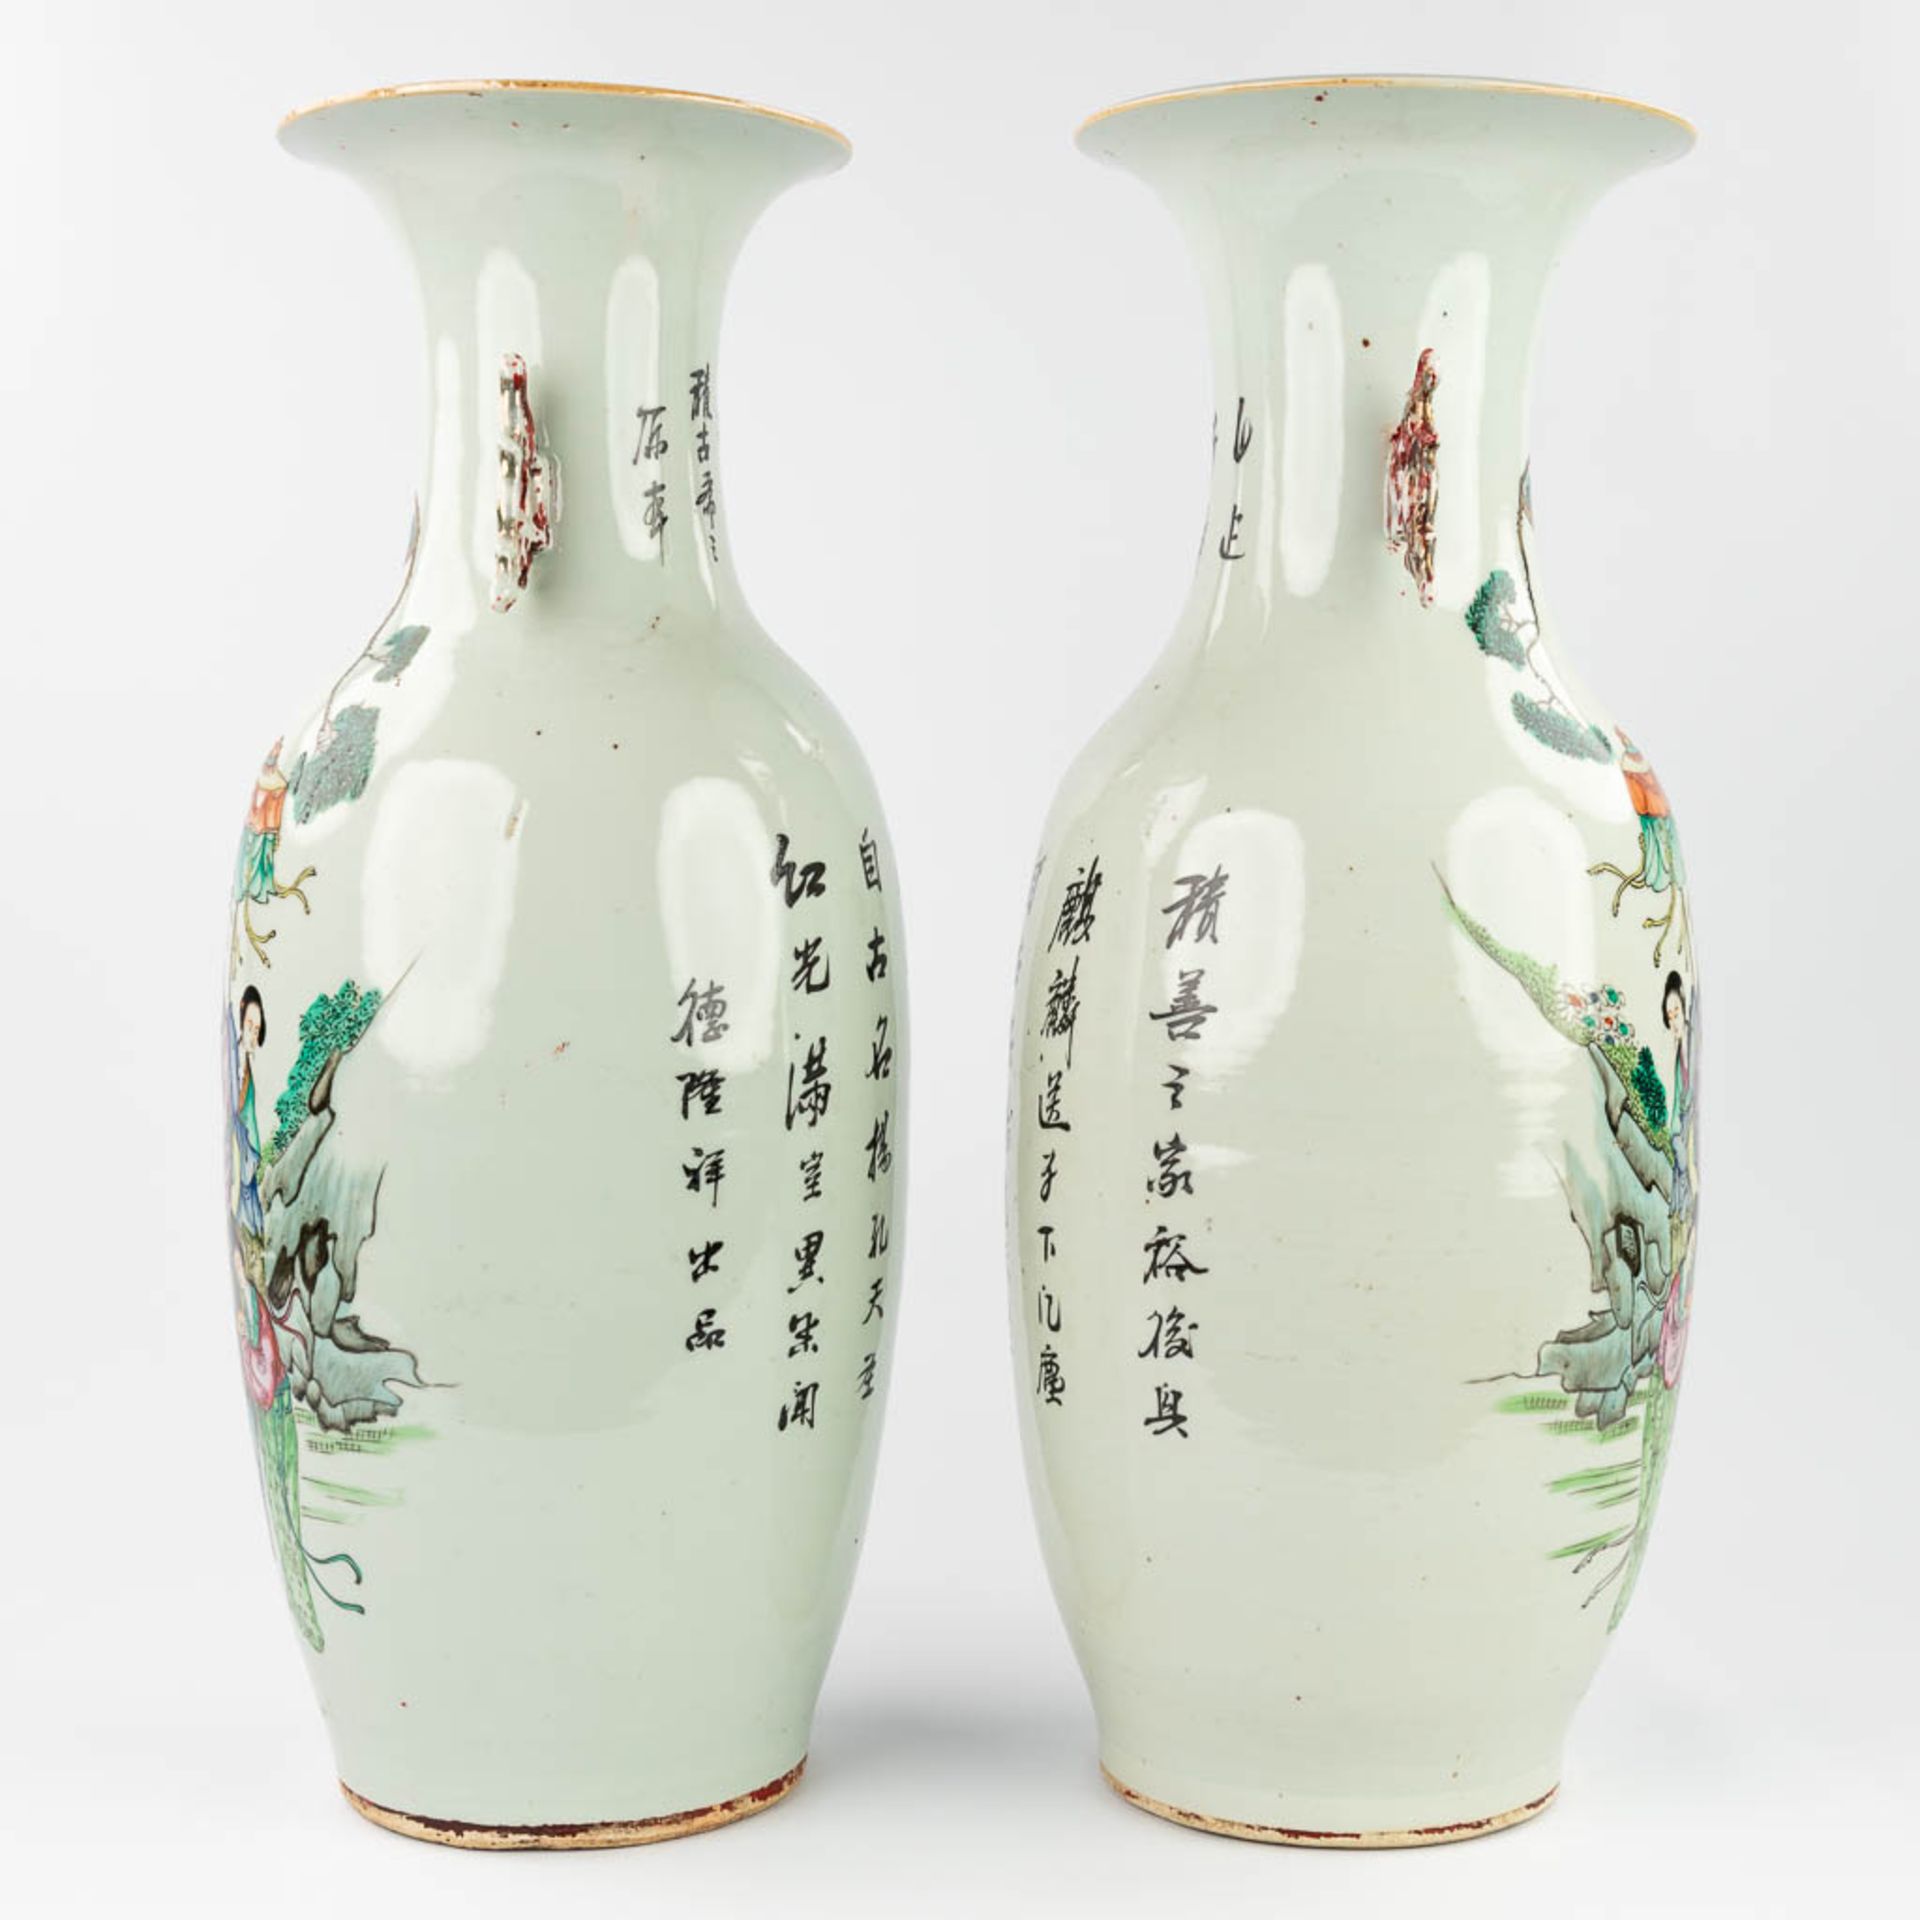 A pair of Chinese vases made of porcelain and decorated with mythological figurines. (58 x 22 cm) - Image 9 of 13